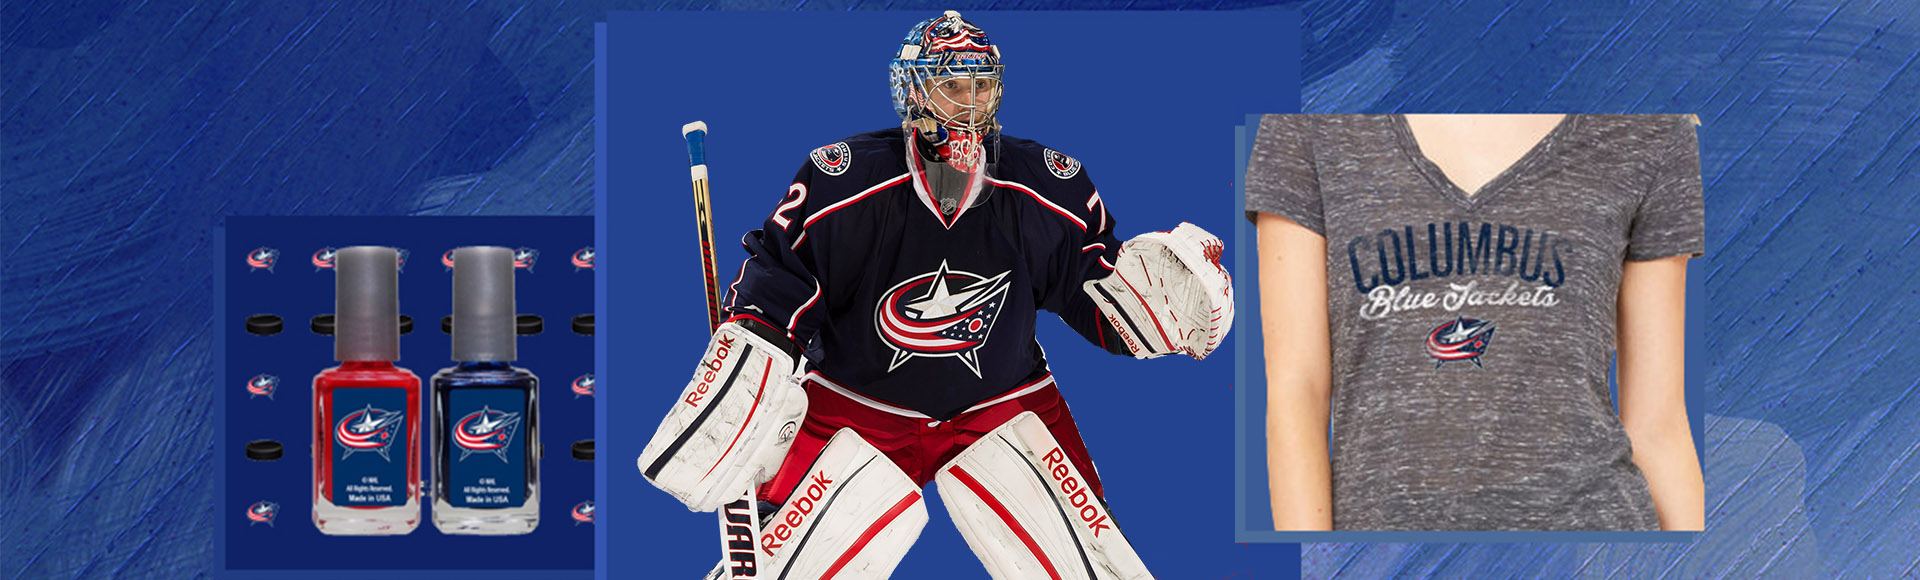 Licensed Columbus Blue Jackets Jerseys, T-shirts and Hoodies 